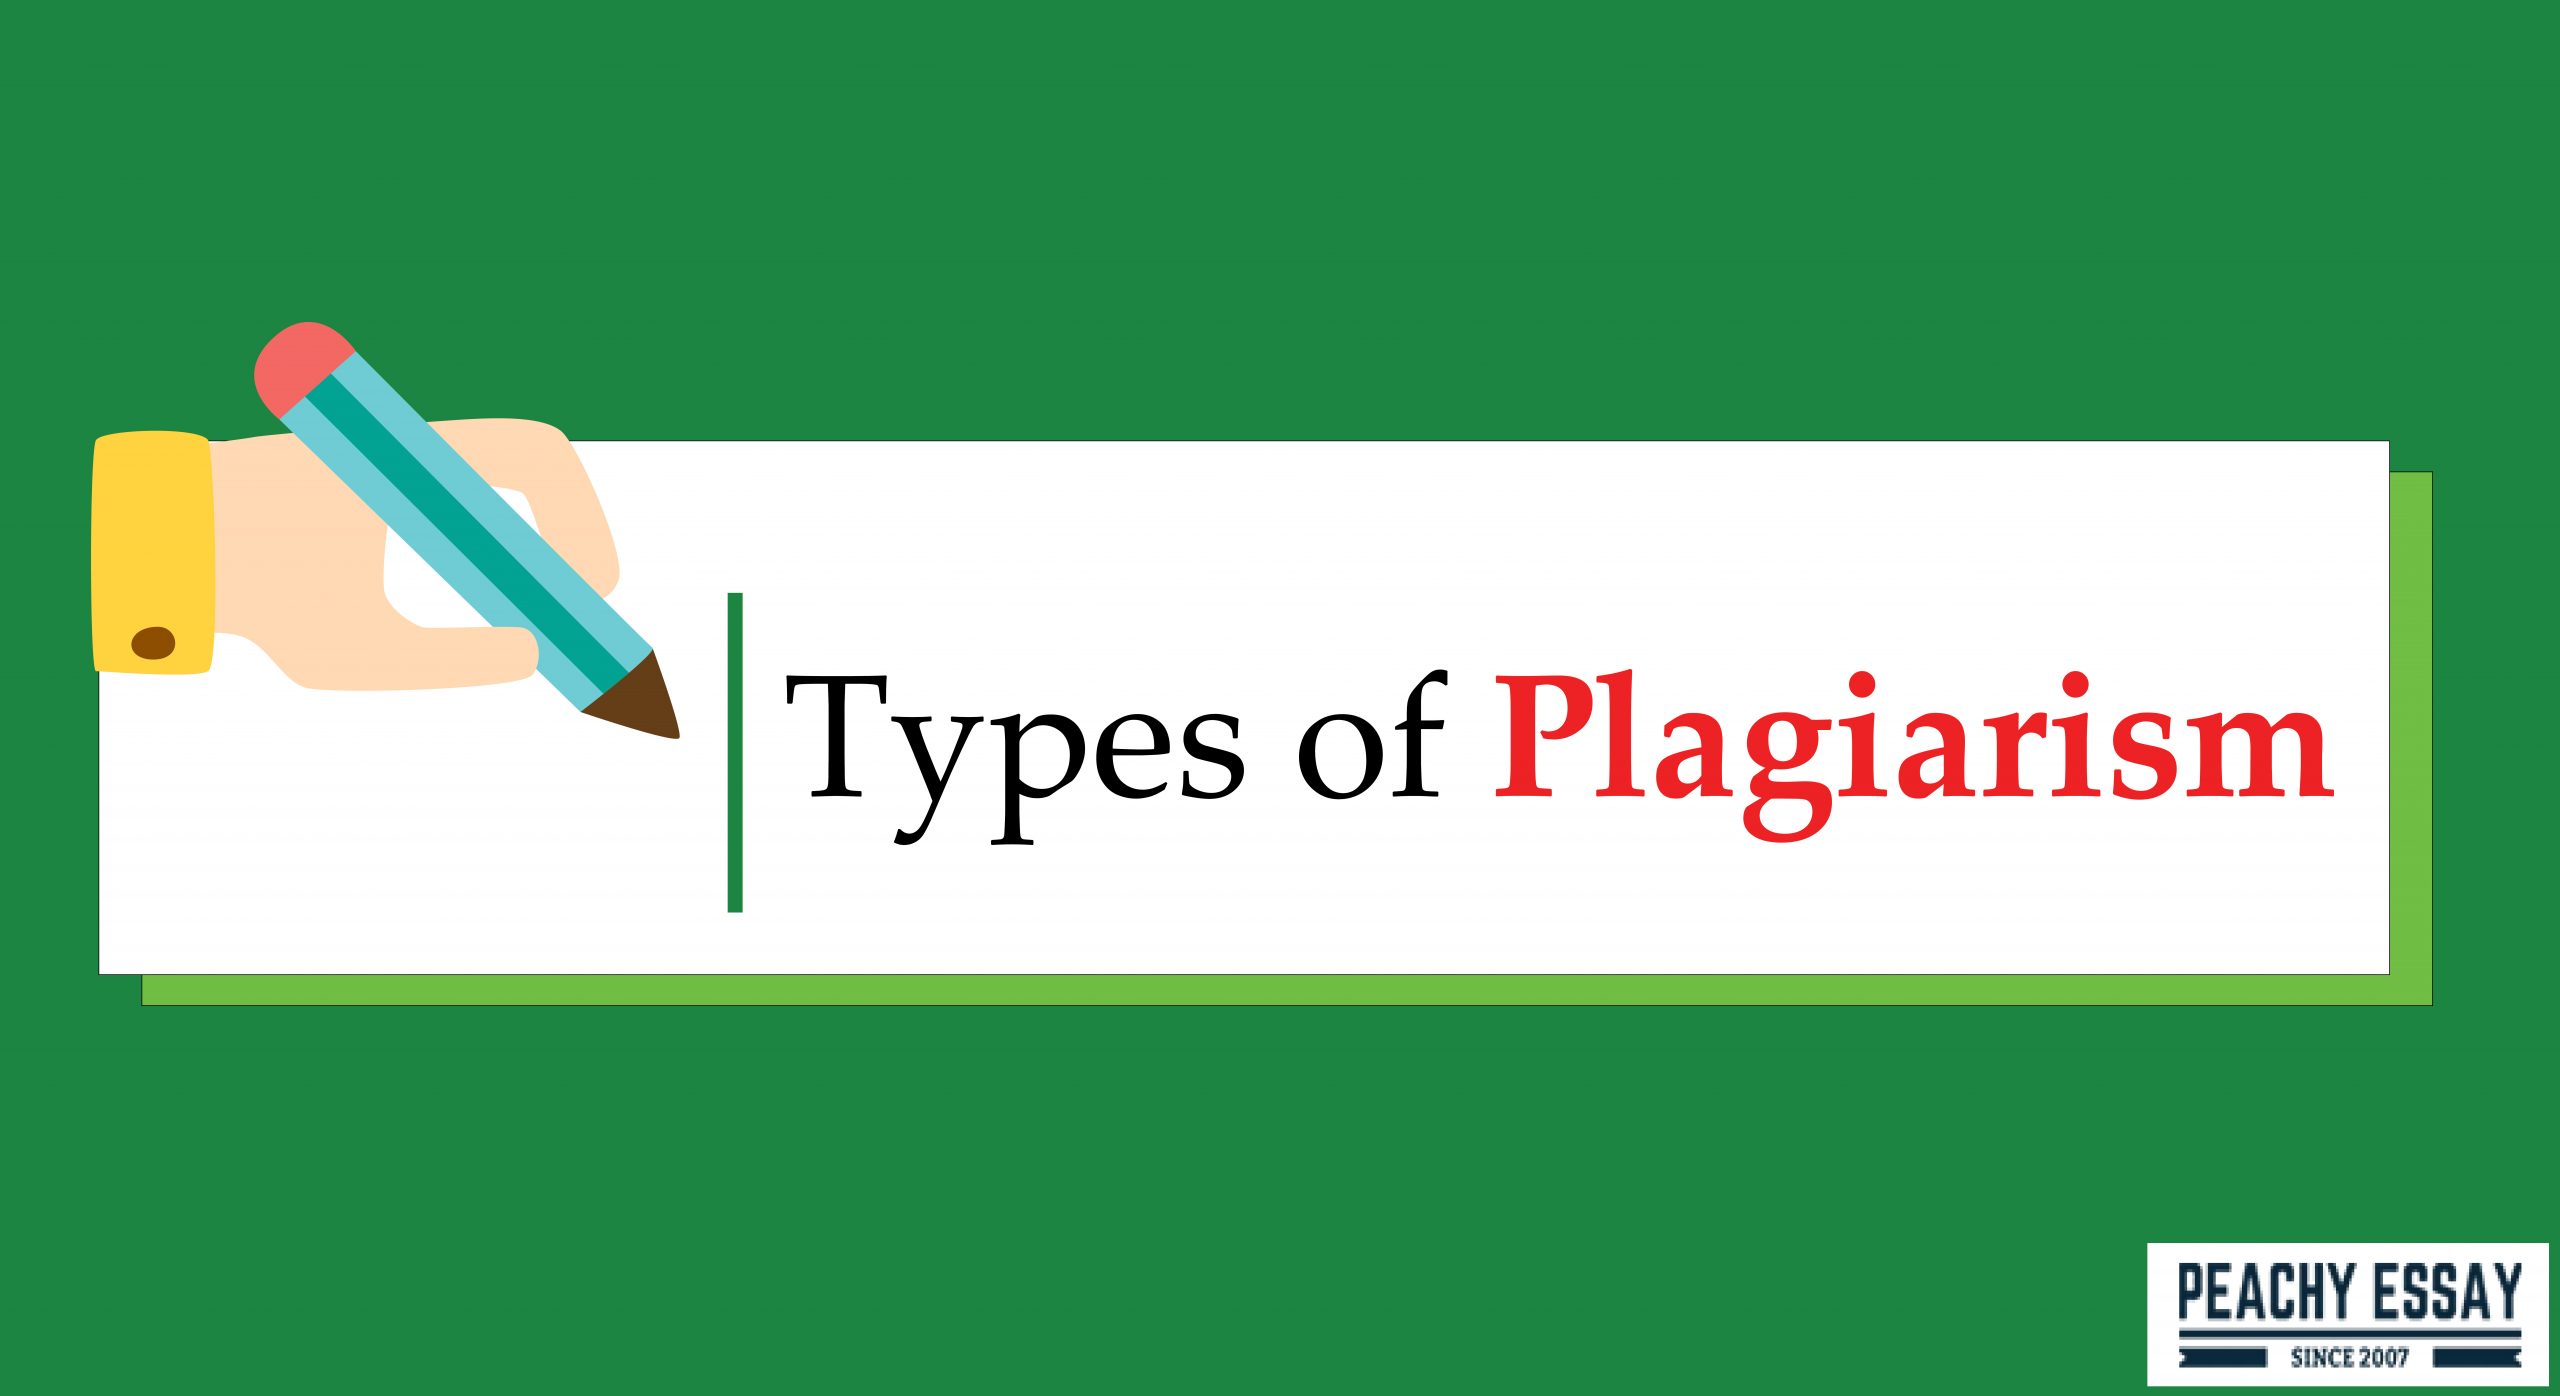 plagiarism in an essay is viewed as a major offense